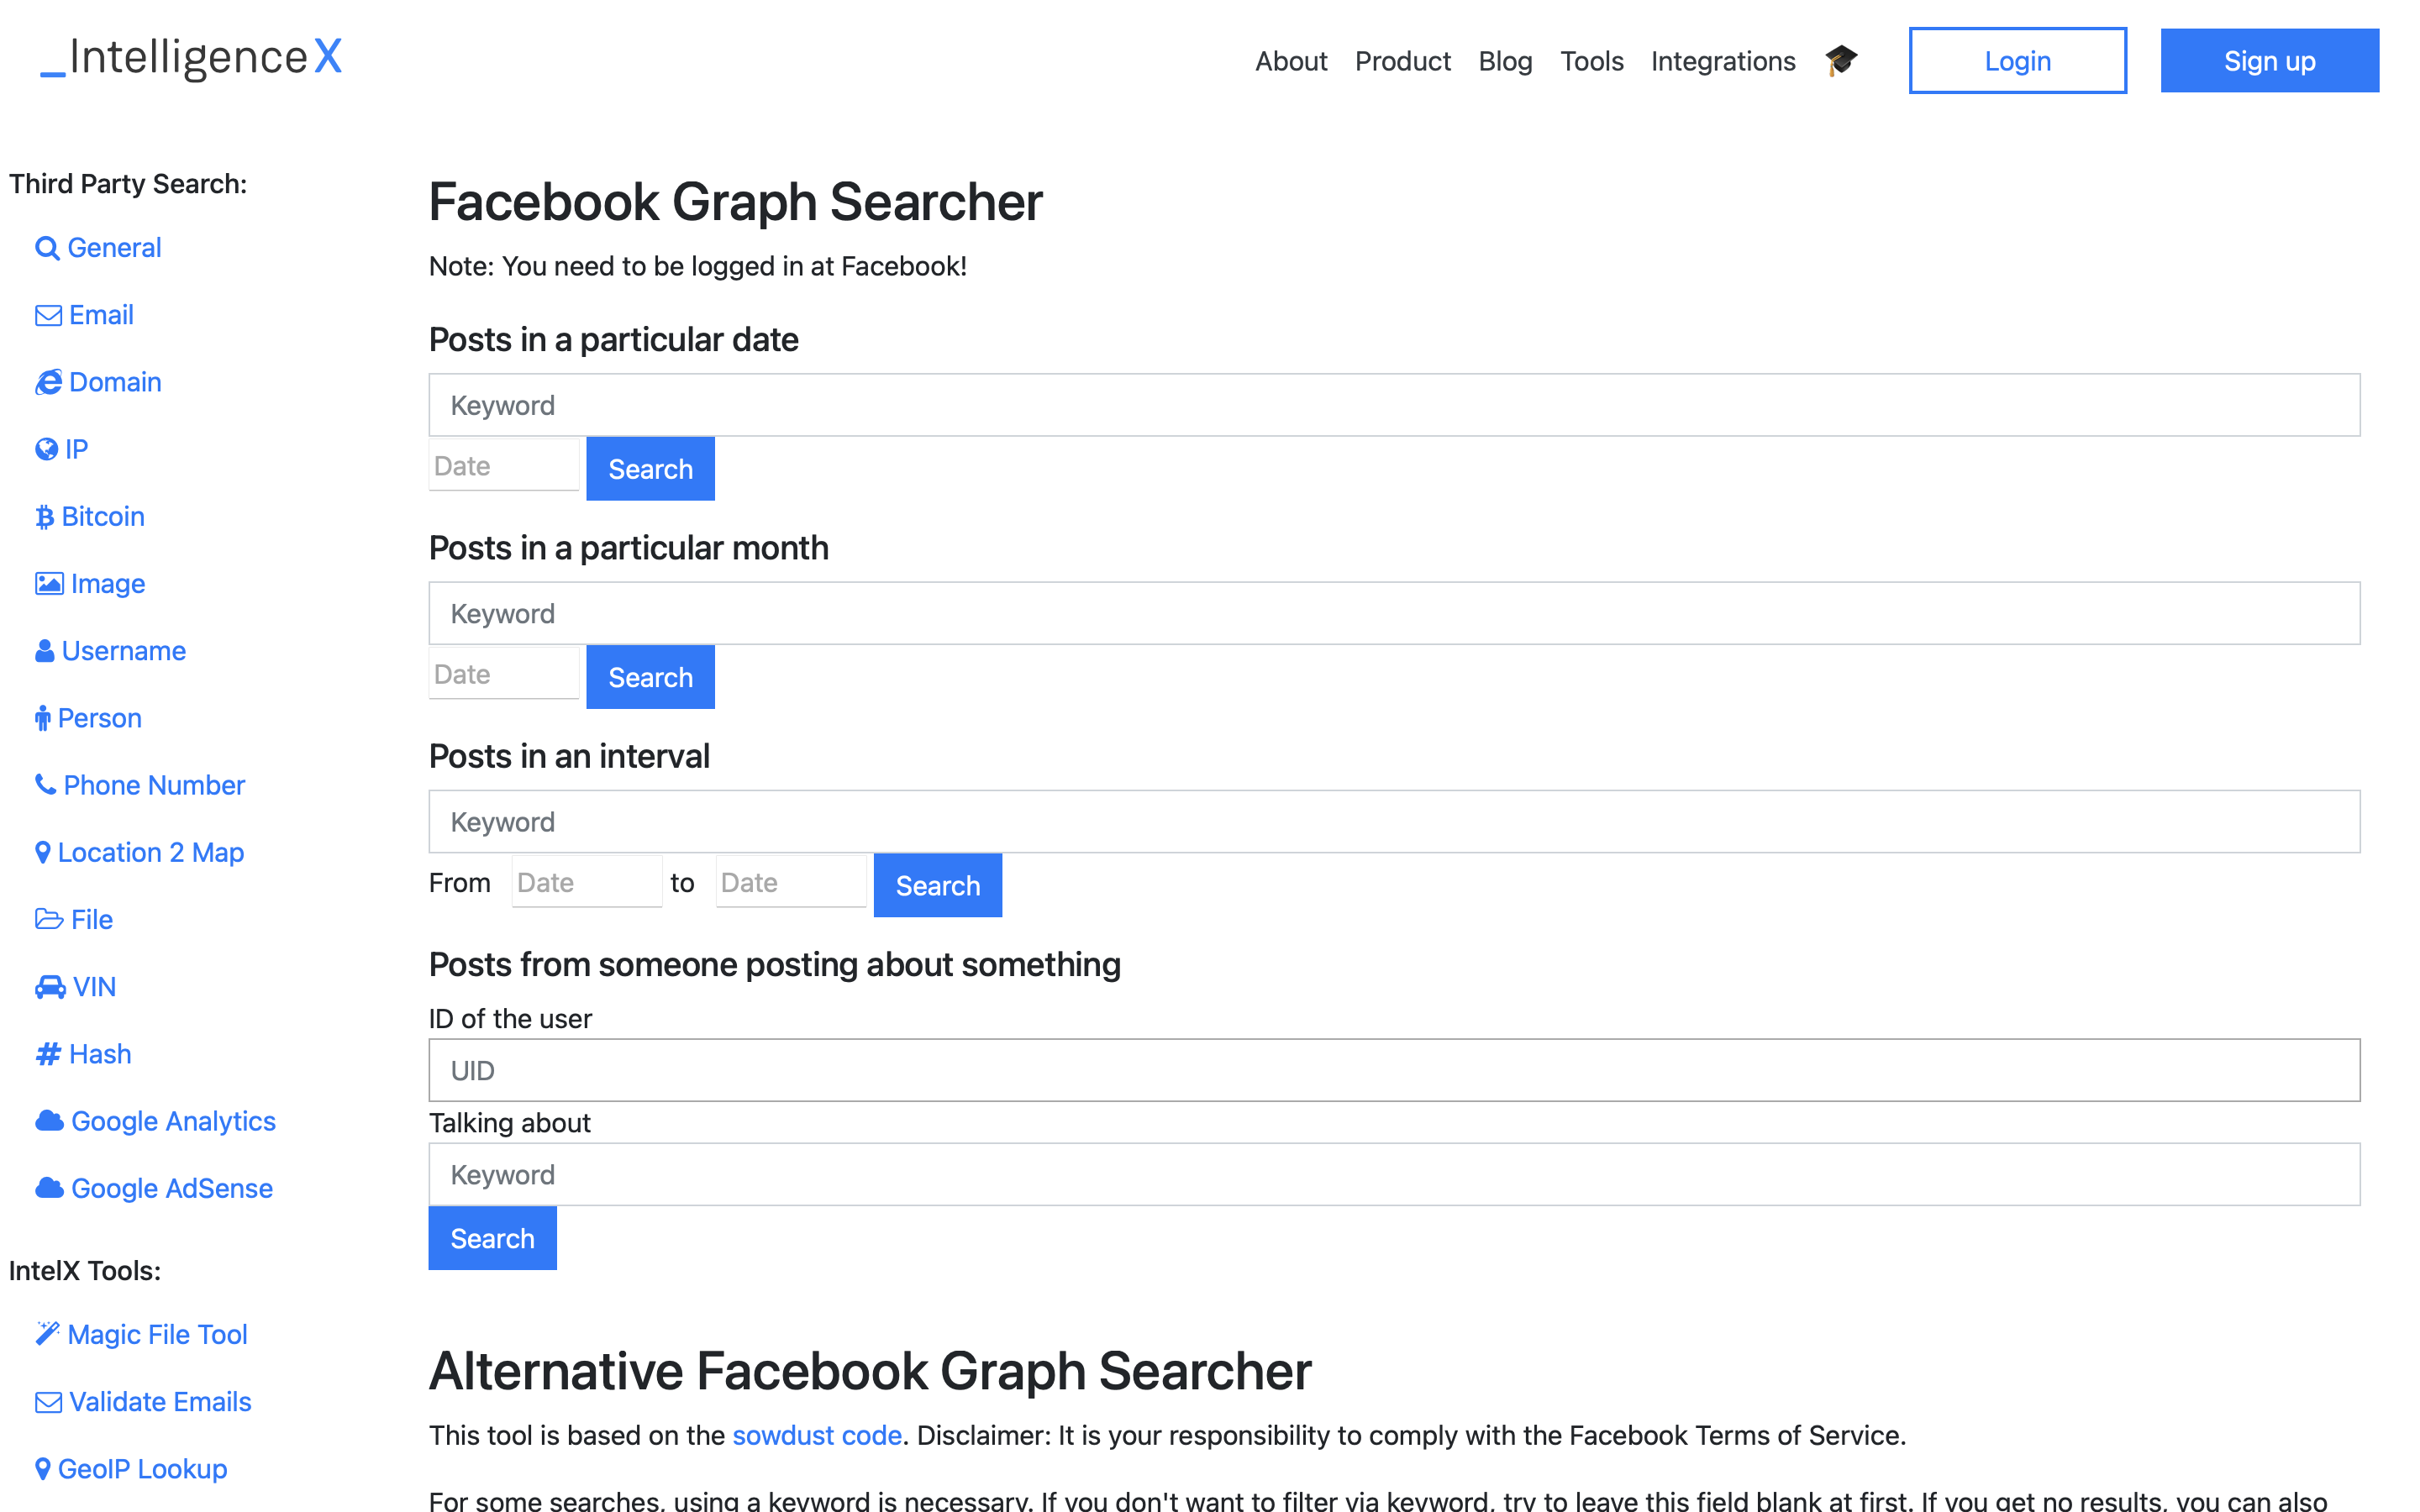 IntelligenceX Facebook Search tools